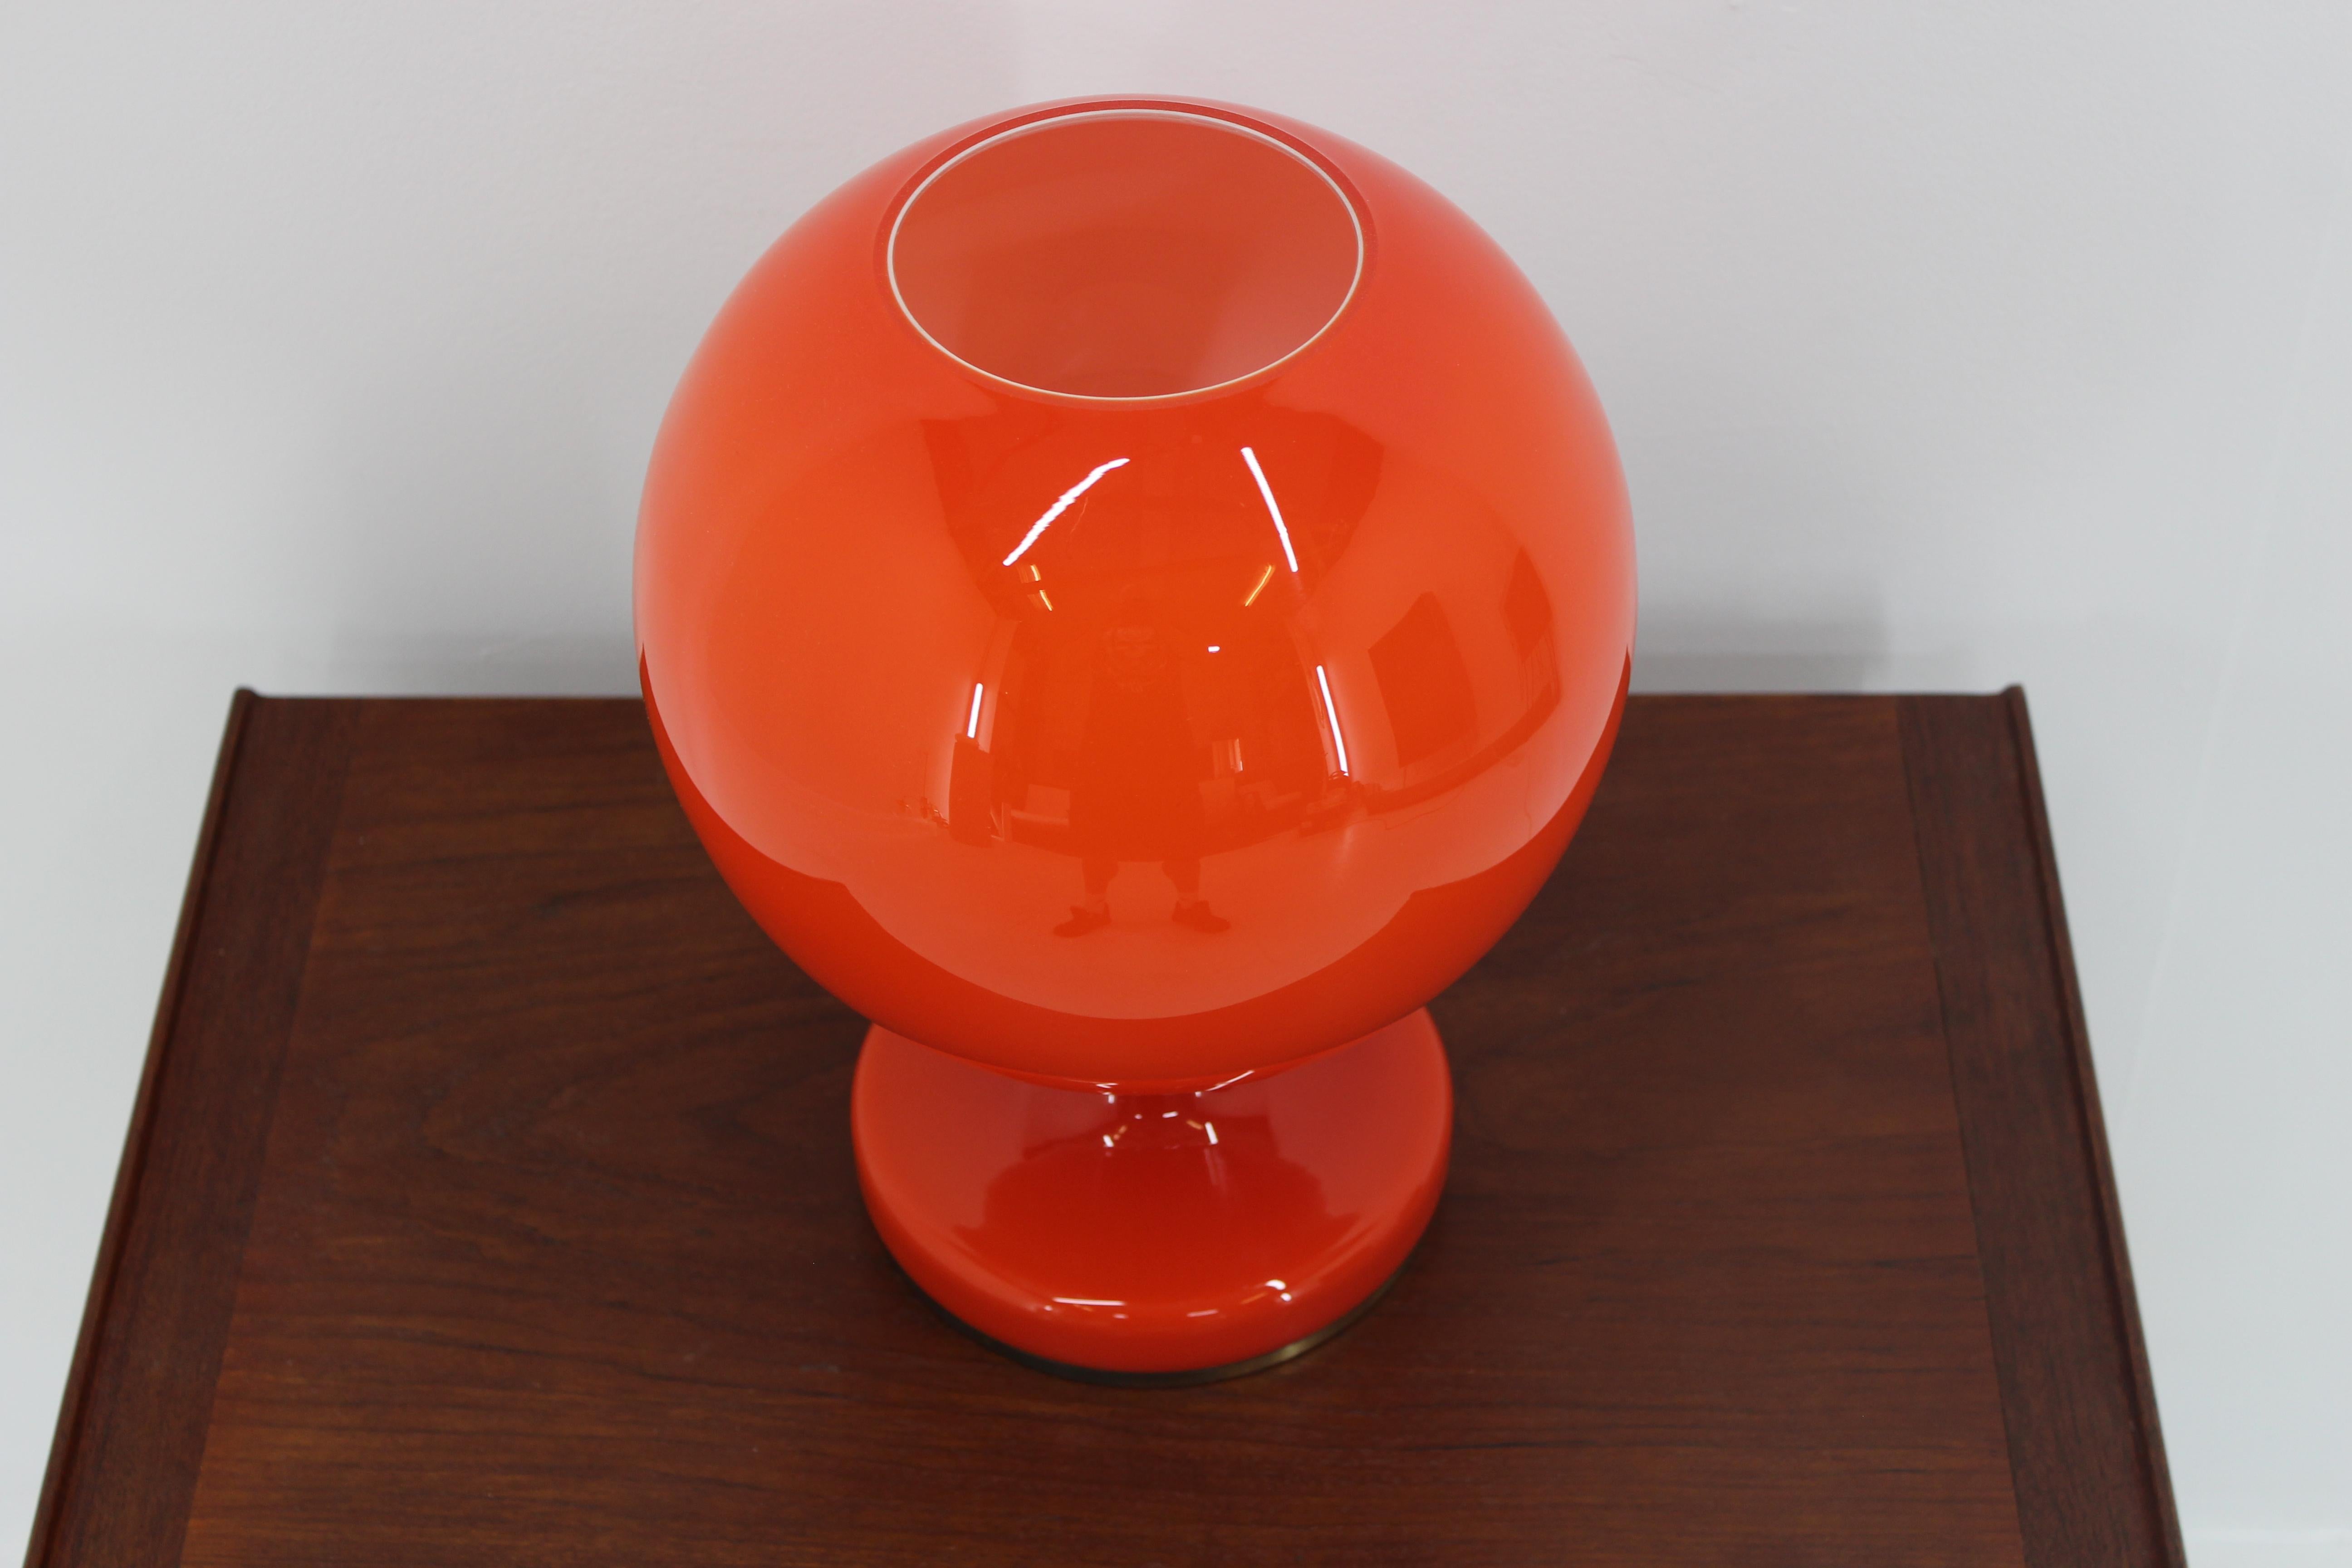 Made in Czechoslovakia
Made of opaline glass
Re-polished
Fully functional
Original condition.